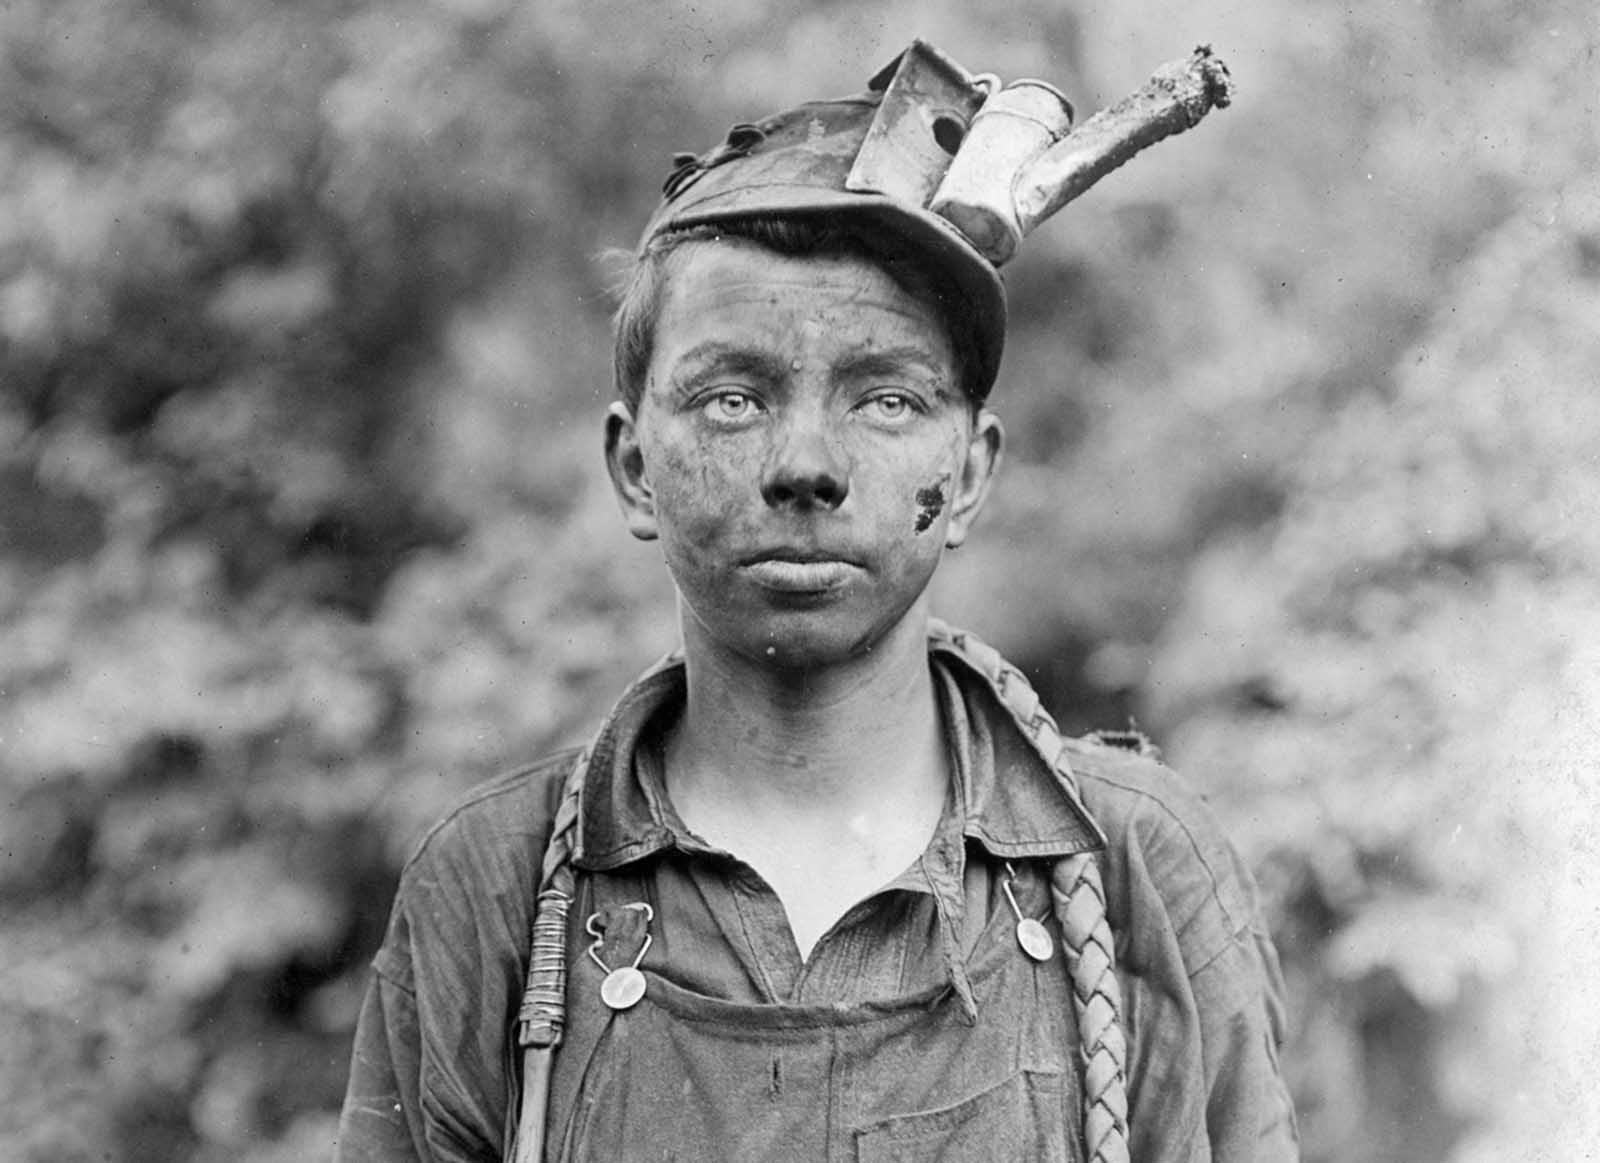 A young driver in the Brown Mine in Brown, West Virginia, in September of 1908. He had been driving pack animals for one year, working from 7 a.m. to 5:30 p.m. daily. The device attached to his cap is an oil-wick cap lamp, which would be lit when the boy was working in the mine tunnels.